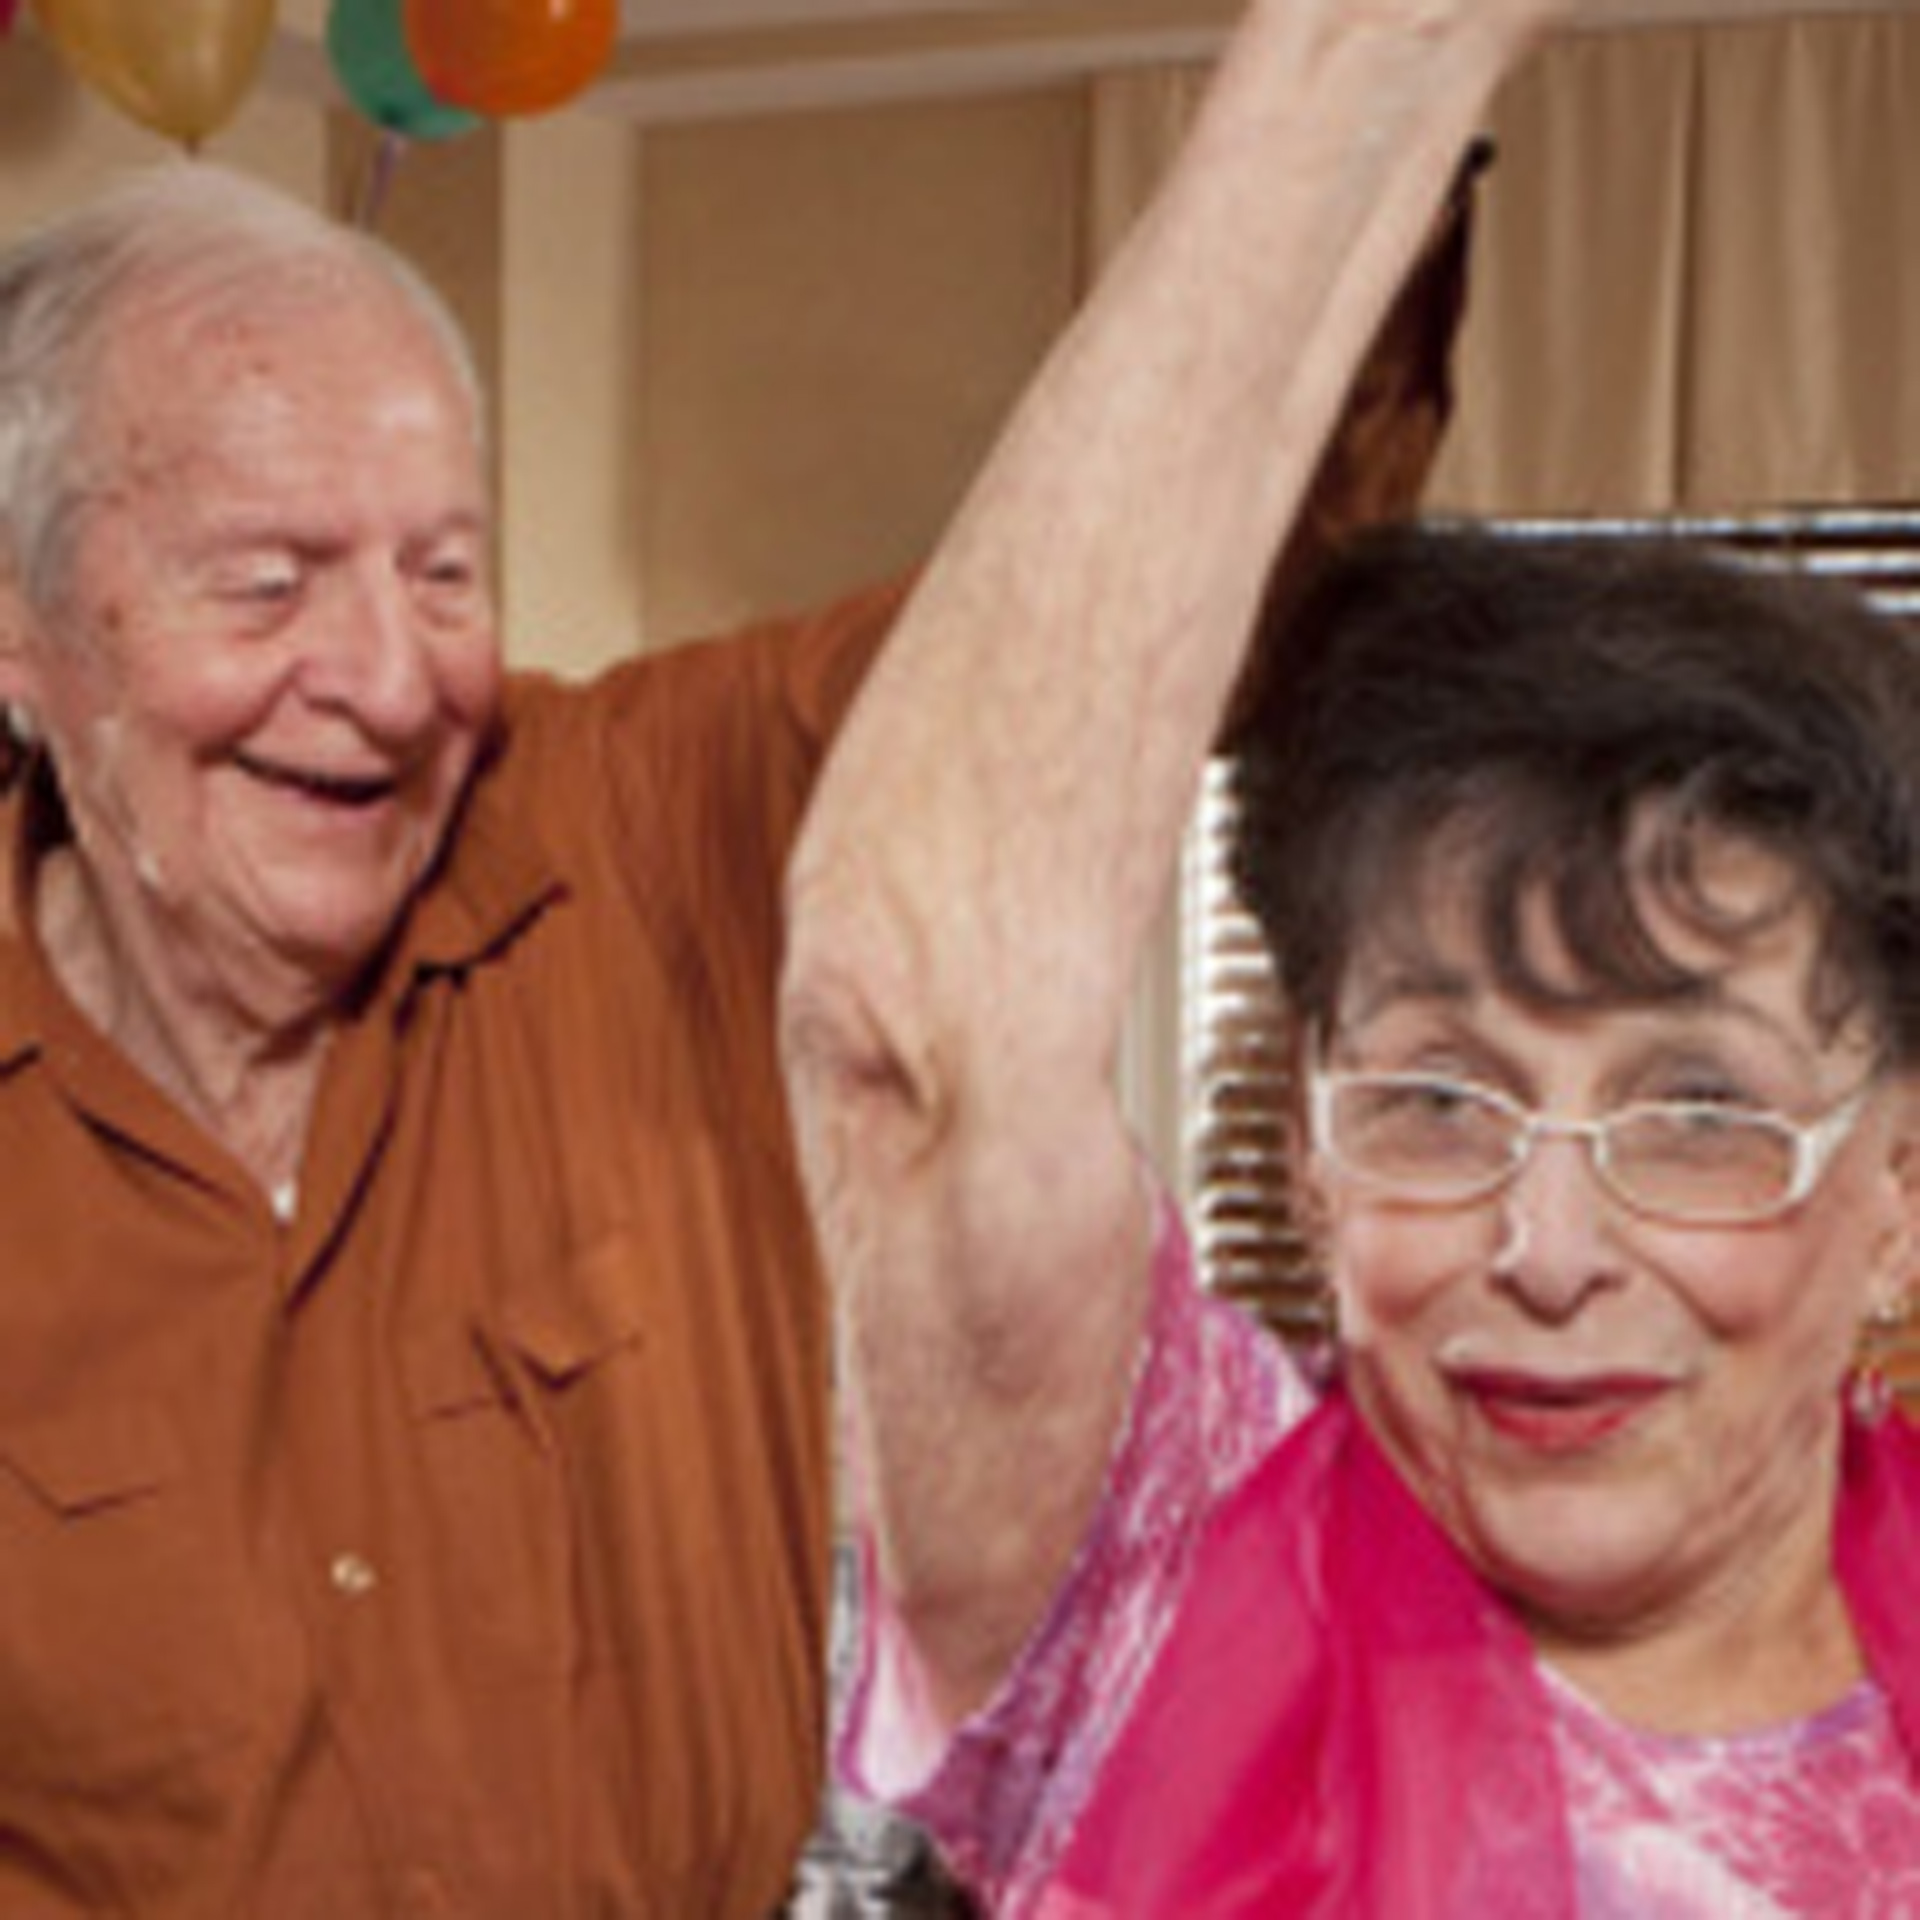 Older man looking at older woman, both are smiling. The man is holding the woman's arm up over her head